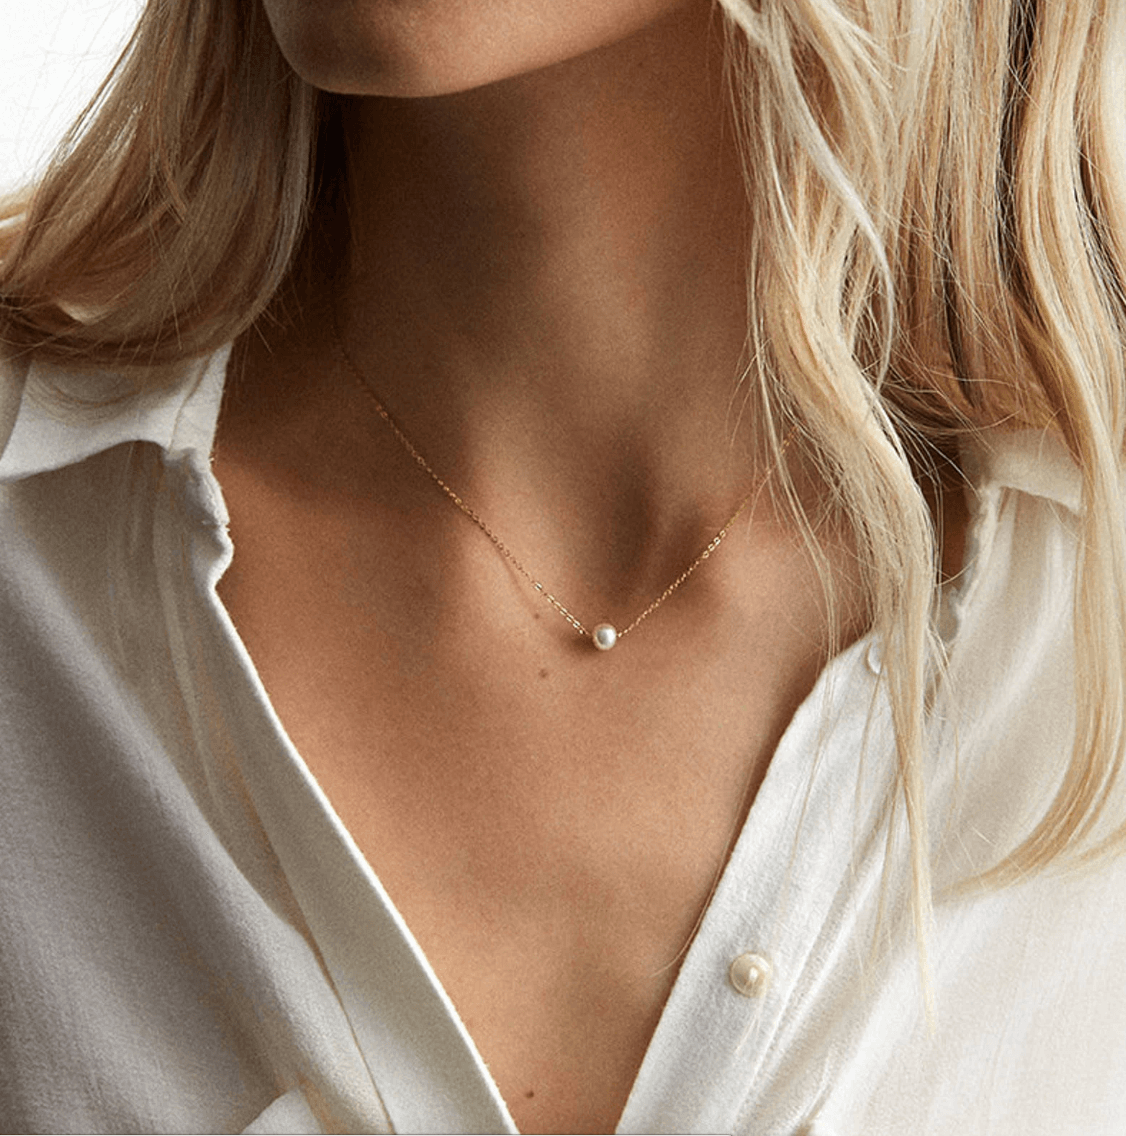 What is minimalism in jewelry?